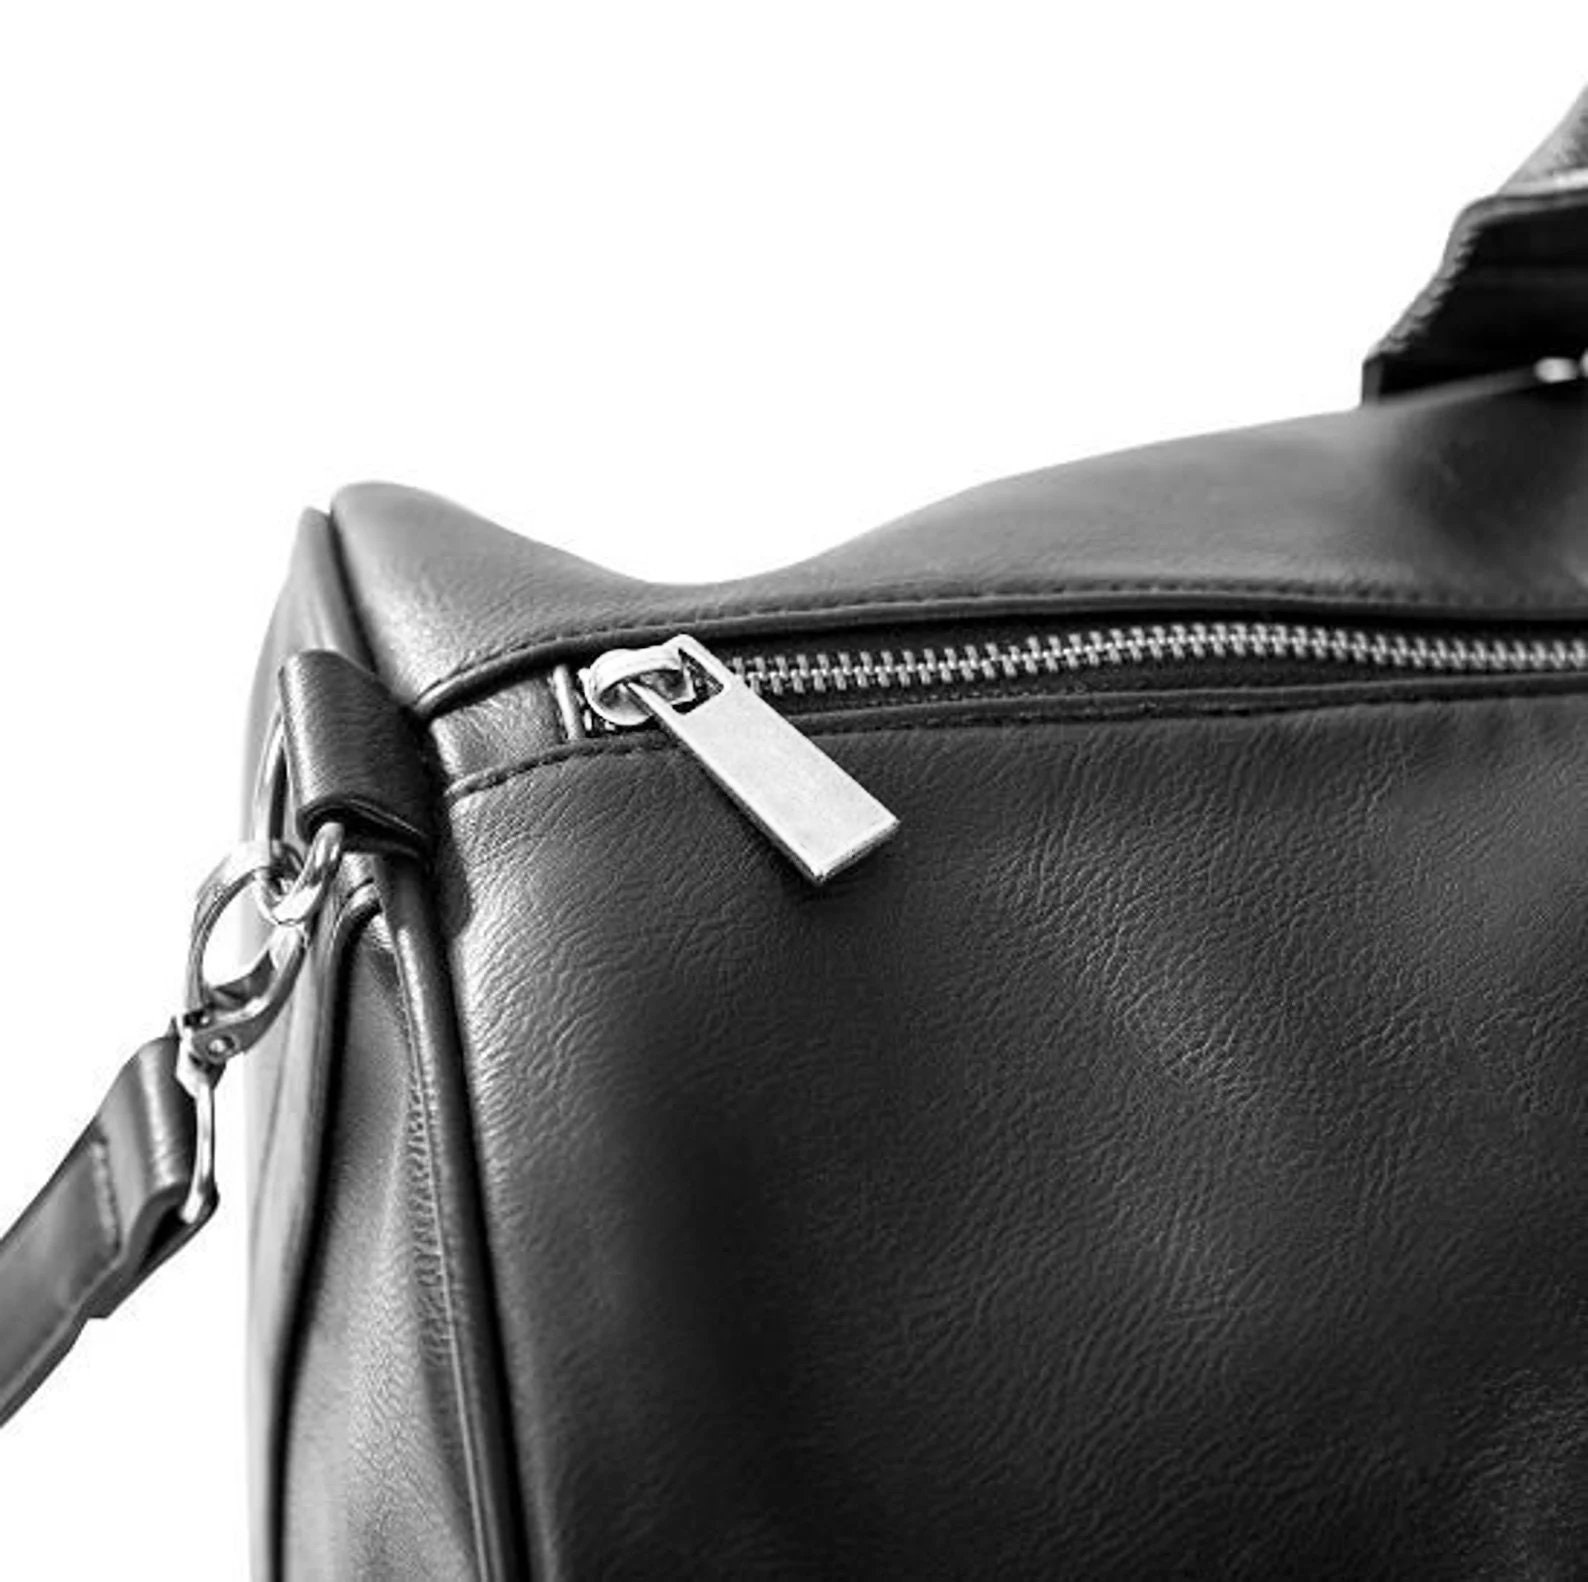 THE MAVERICK Personalized Men's Leather Weekender Duffle Bag